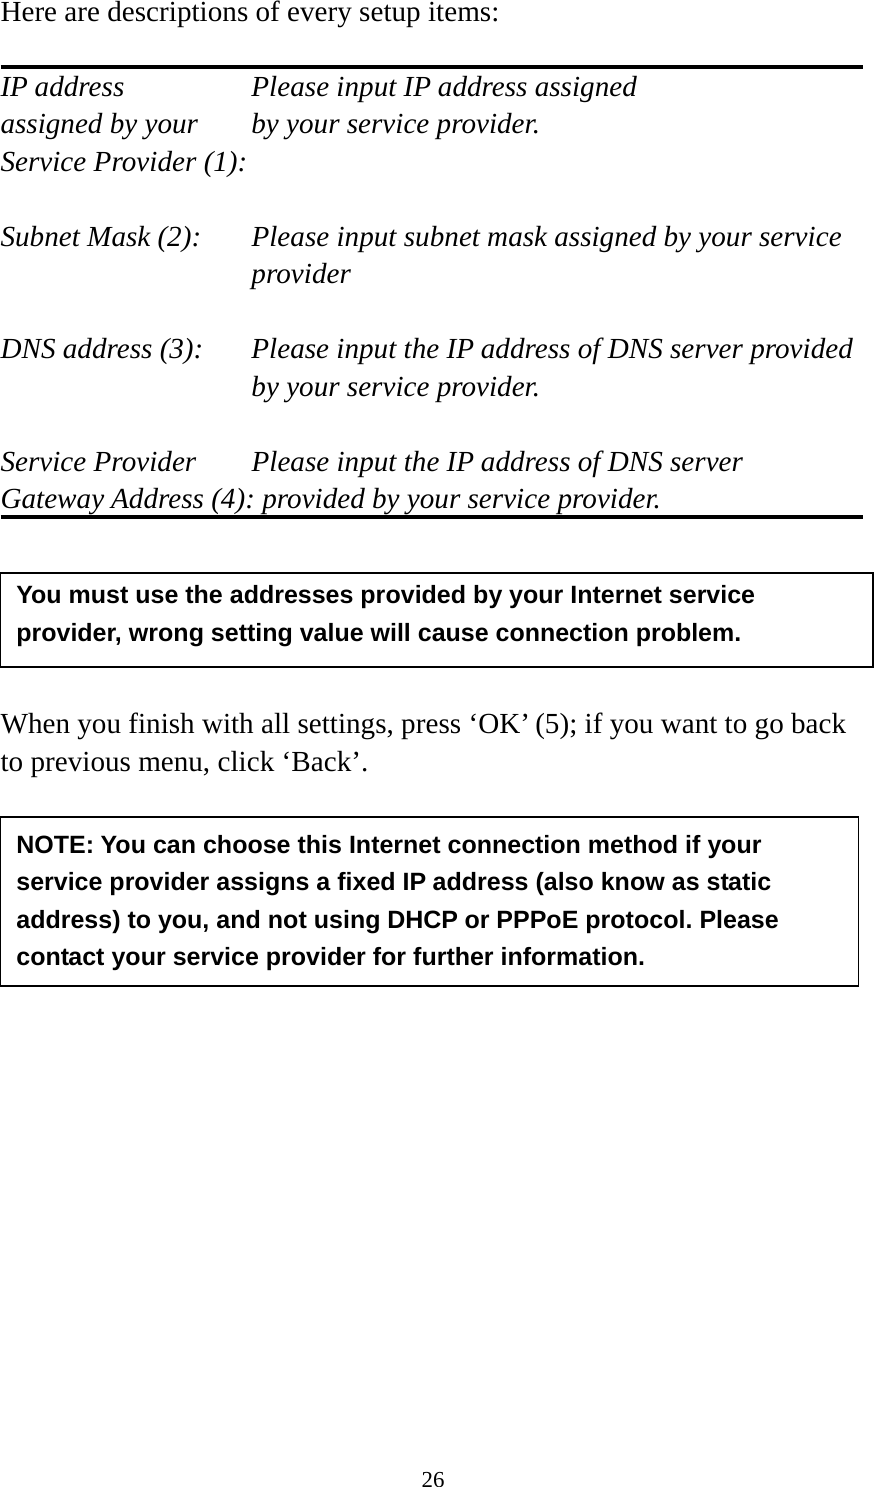 26 Here are descriptions of every setup items:  IP address        Please input IP address assigned assigned by your    by your service provider. Service Provider (1):    Subnet Mask (2):    Please input subnet mask assigned by your service provider   DNS address (3):    Please input the IP address of DNS server provided by your service provider.  Service Provider    Please input the IP address of DNS server Gateway Address (4): provided by your service provider.      When you finish with all settings, press ‘OK’ (5); if you want to go back to previous menu, click ‘Back’.                  NOTE: You can choose this Internet connection method if your service provider assigns a fixed IP address (also know as static address) to you, and not using DHCP or PPPoE protocol. Please contact your service provider for further information. You must use the addresses provided by your Internet service provider, wrong setting value will cause connection problem.   